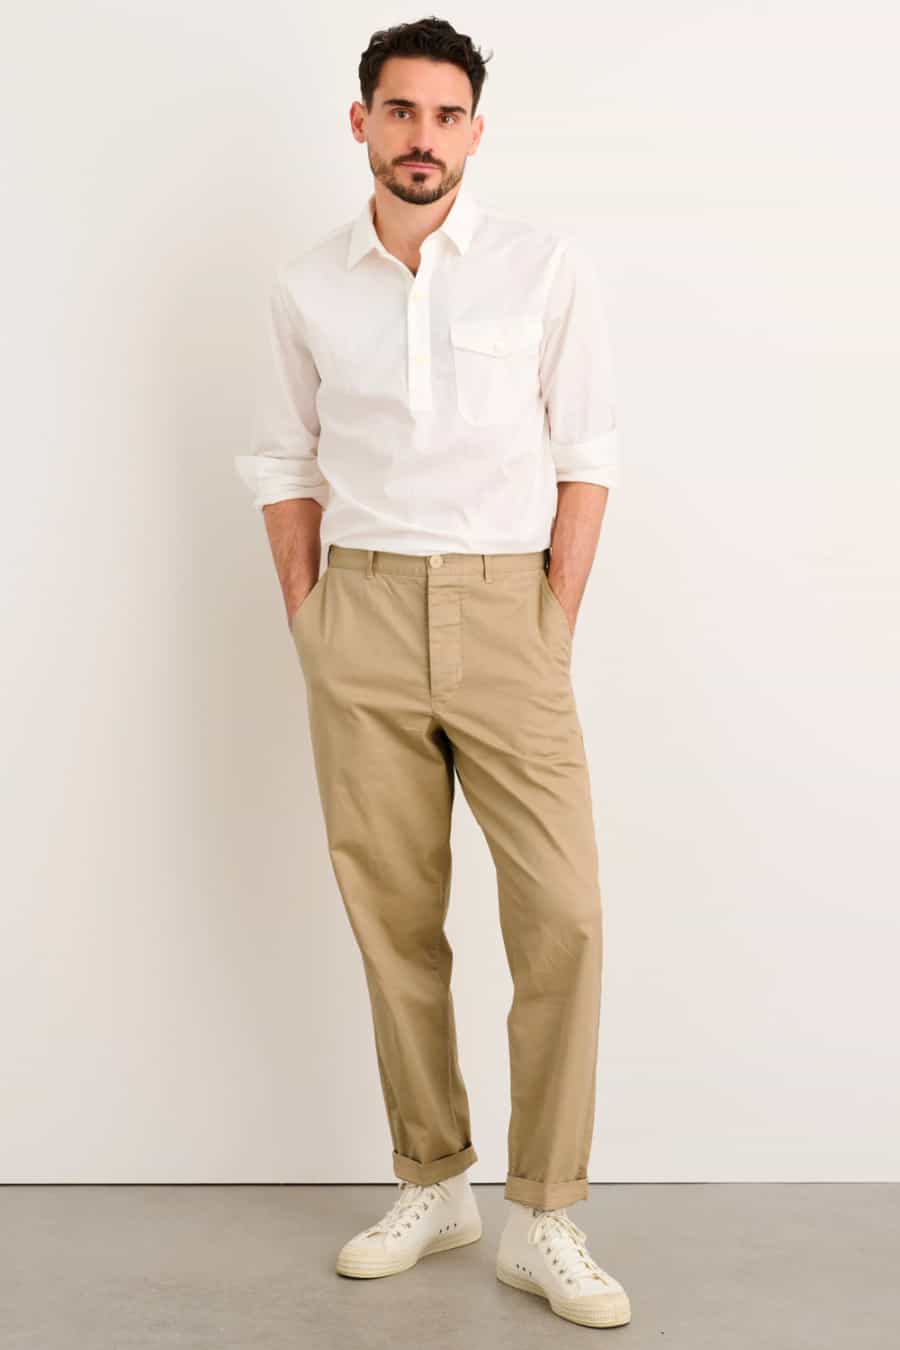 Men's khaki worker pants, tucked in white shirt and white high-top sneakers outfit